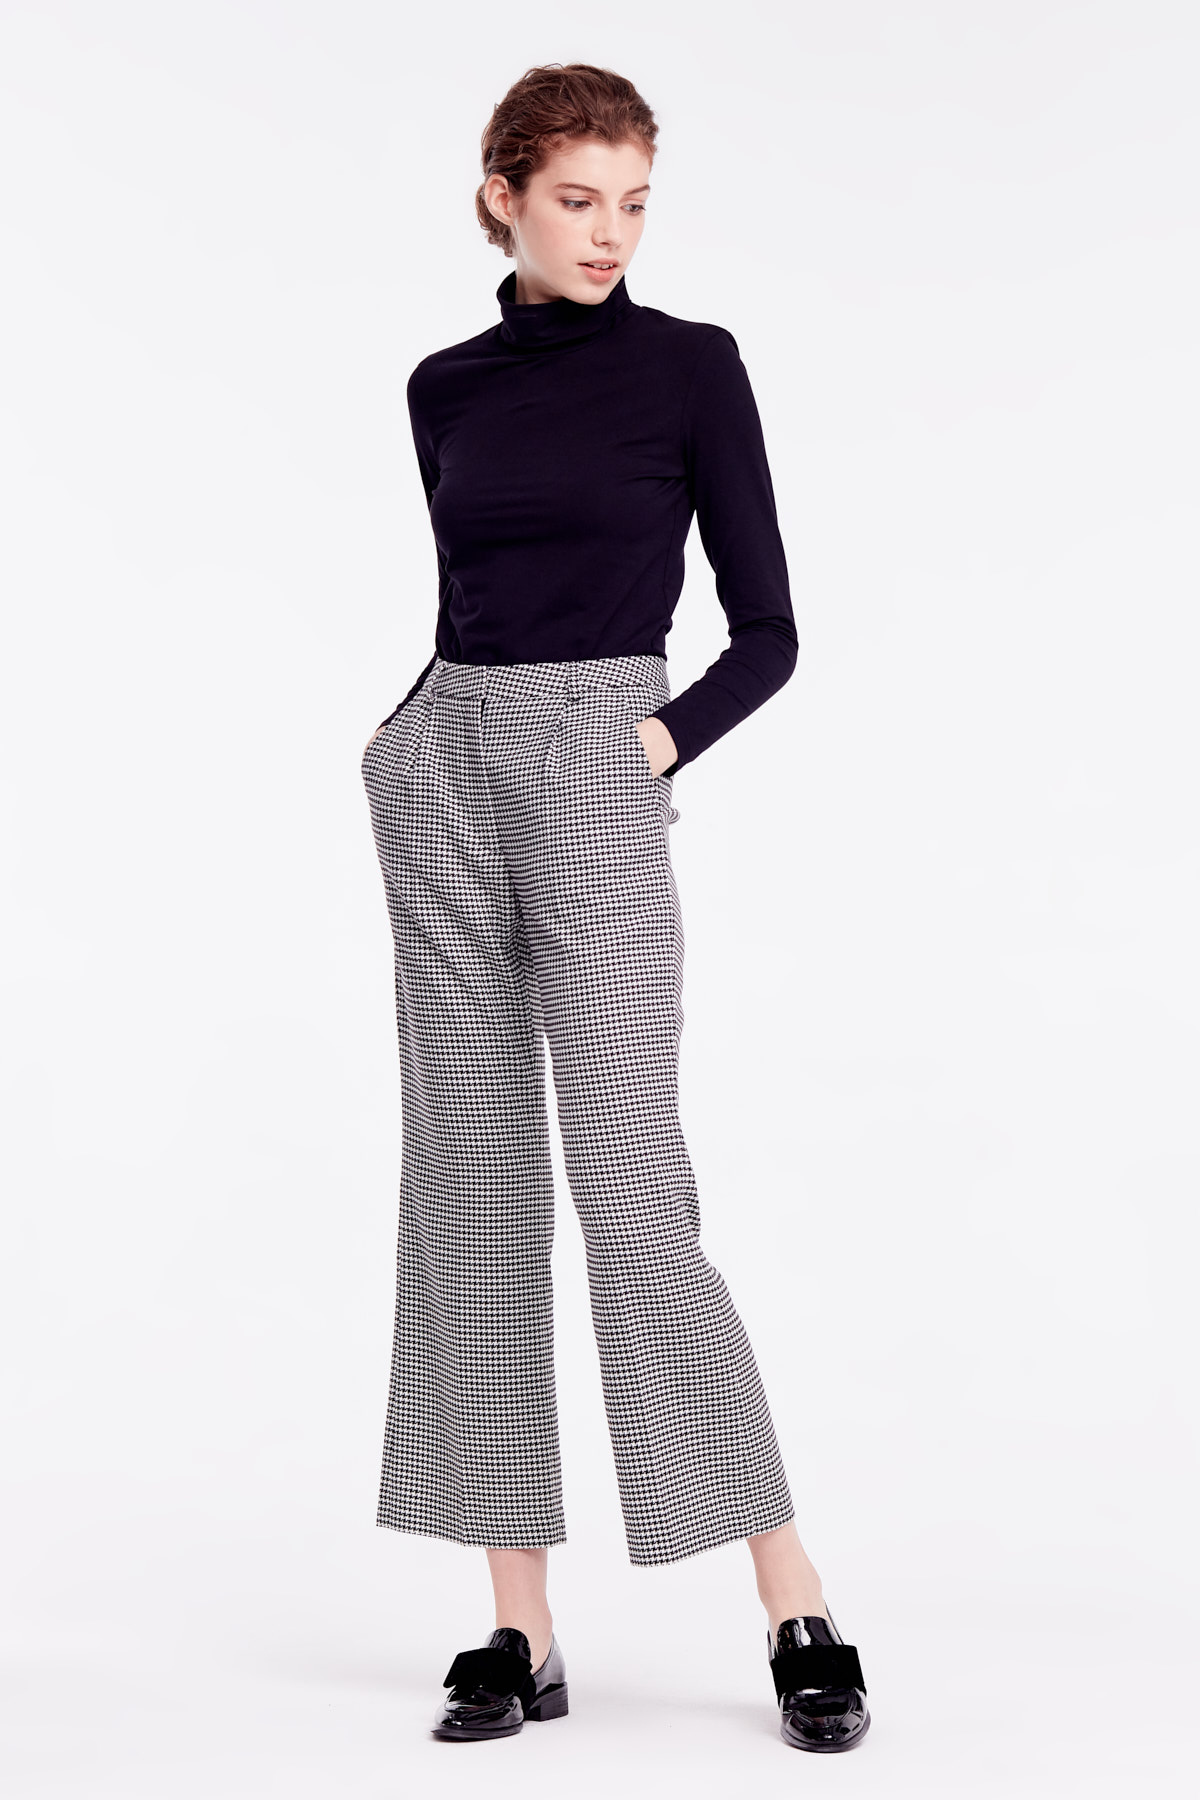 Cropped trousers with black-and-white houndstooth print, photo 3